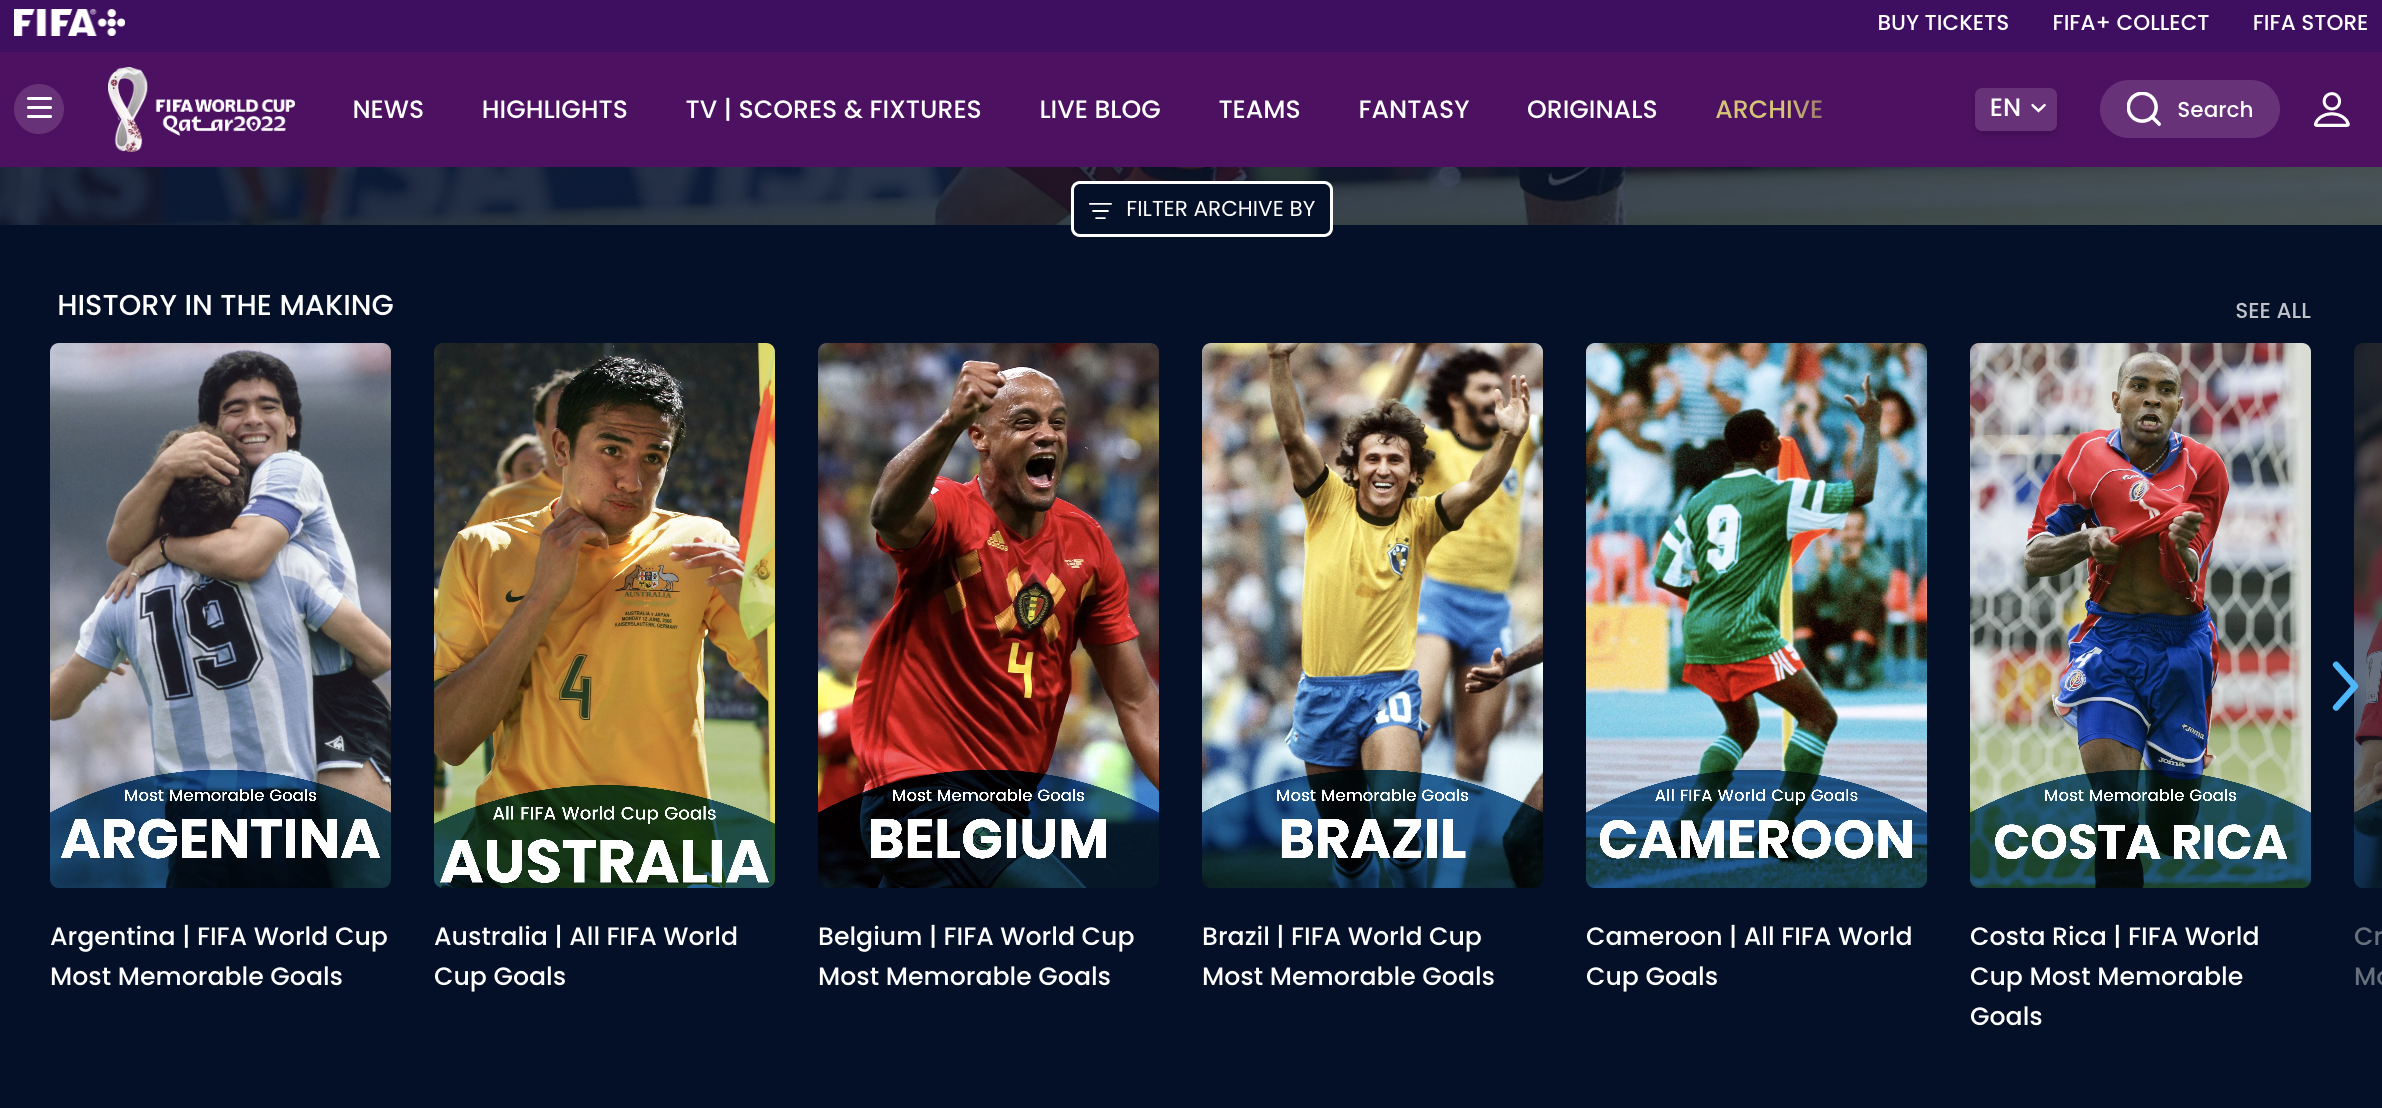 FIFA+ Live Matches, Highlights, More: All You Need to Know About FIFA's  Free OTT Streaming Service